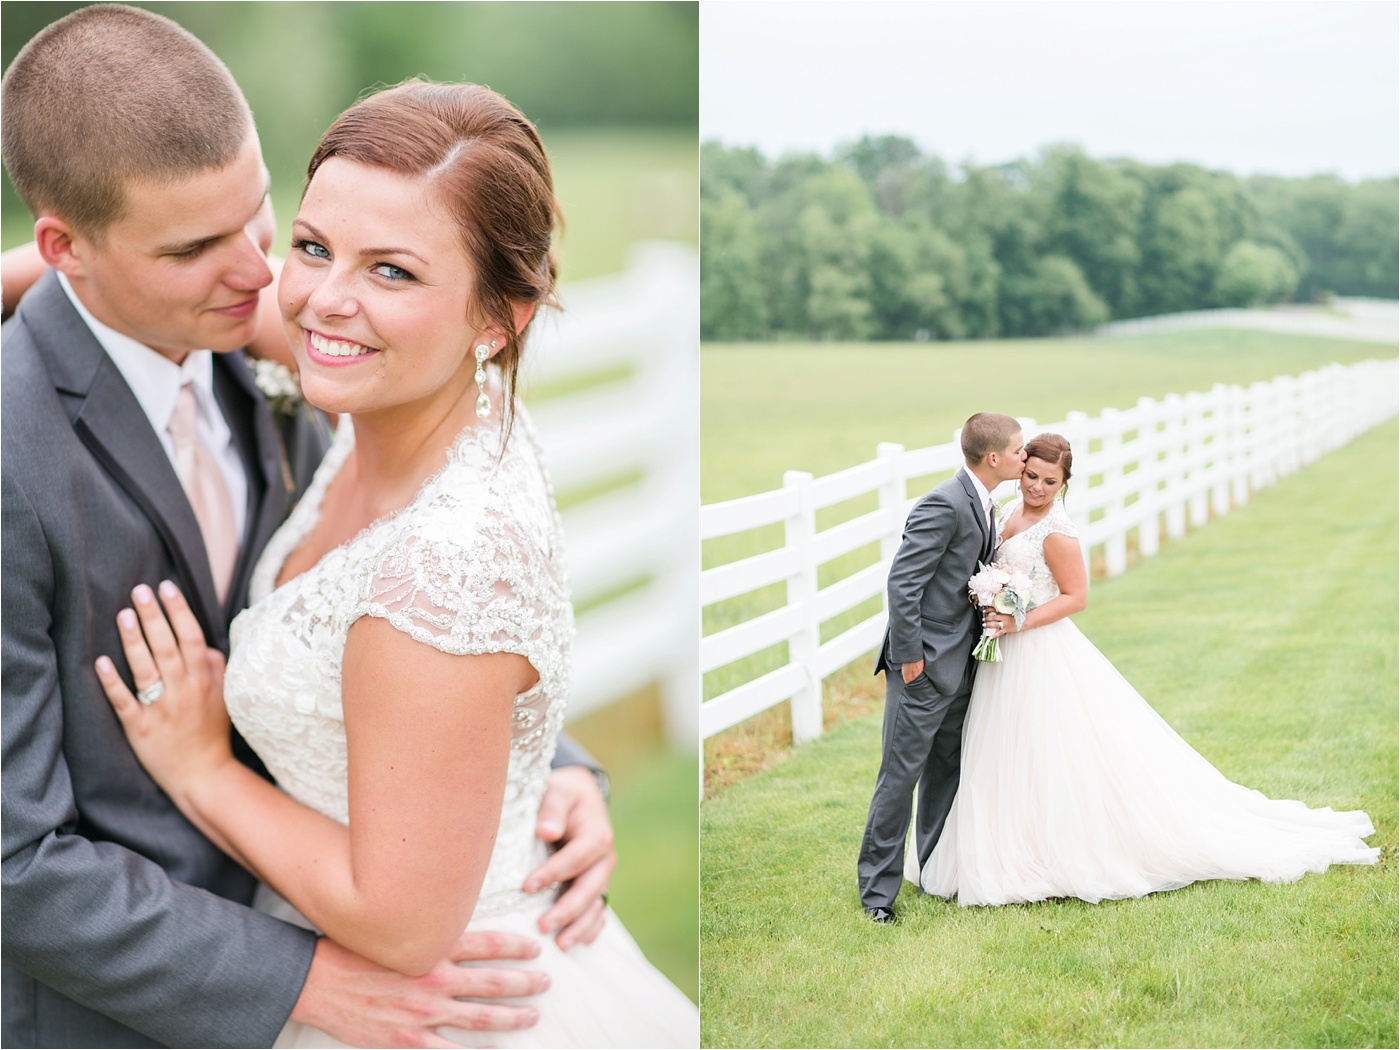 A Blush Outdoor wedding at Irongate Equestrian | KariMe Photography_0141